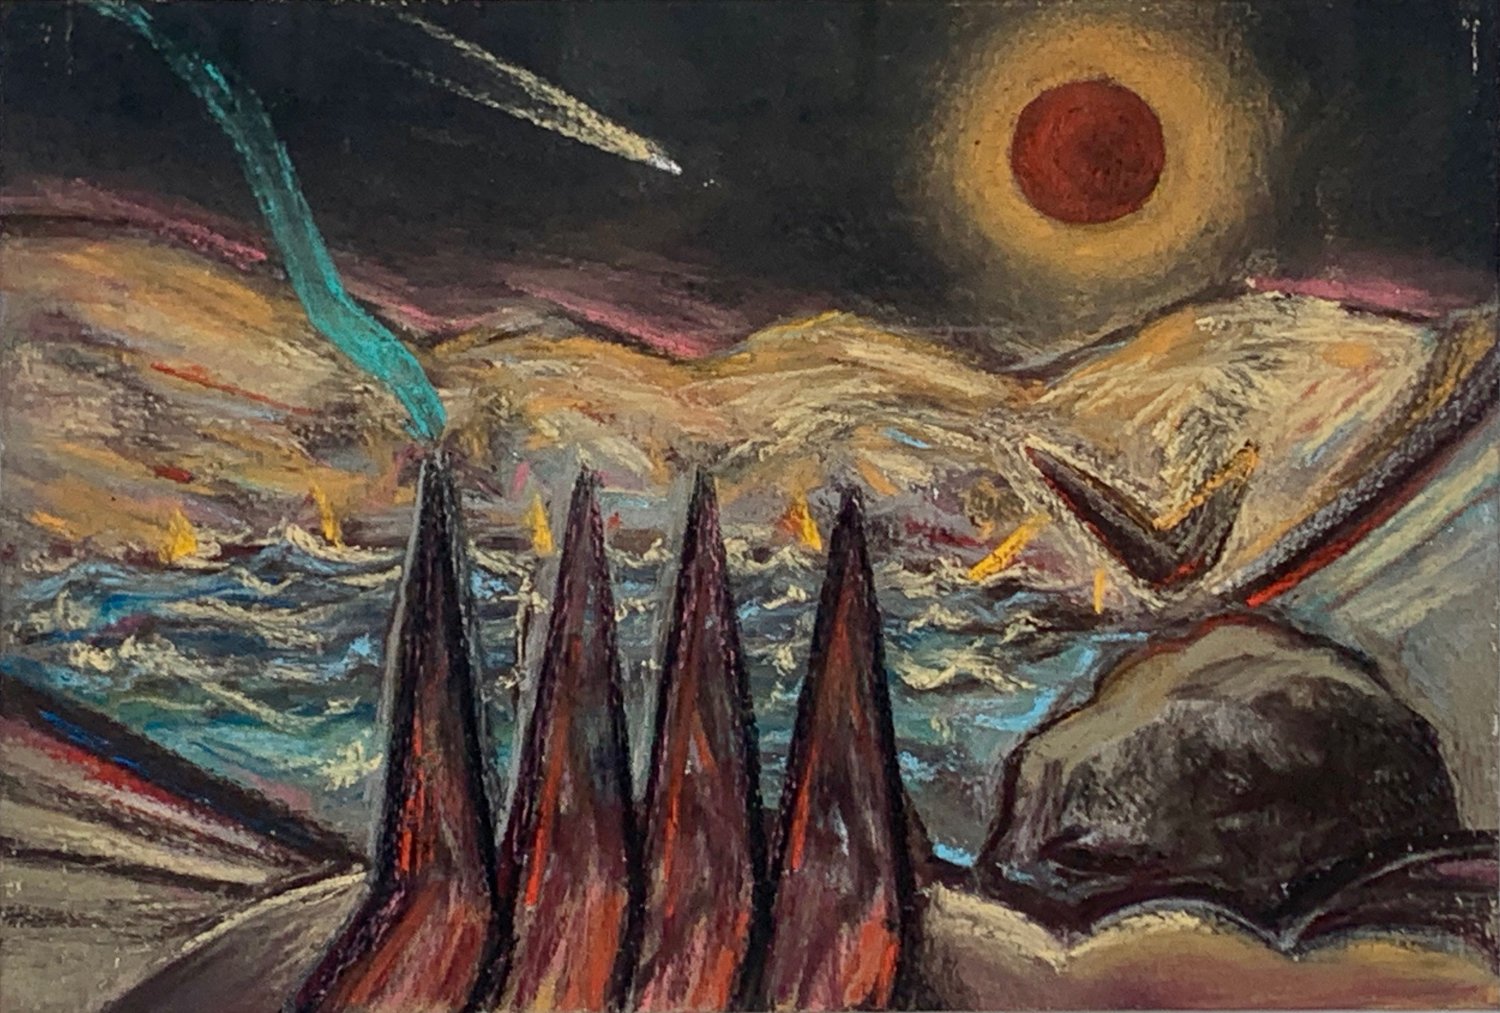 Untitled (Crater with red sun)